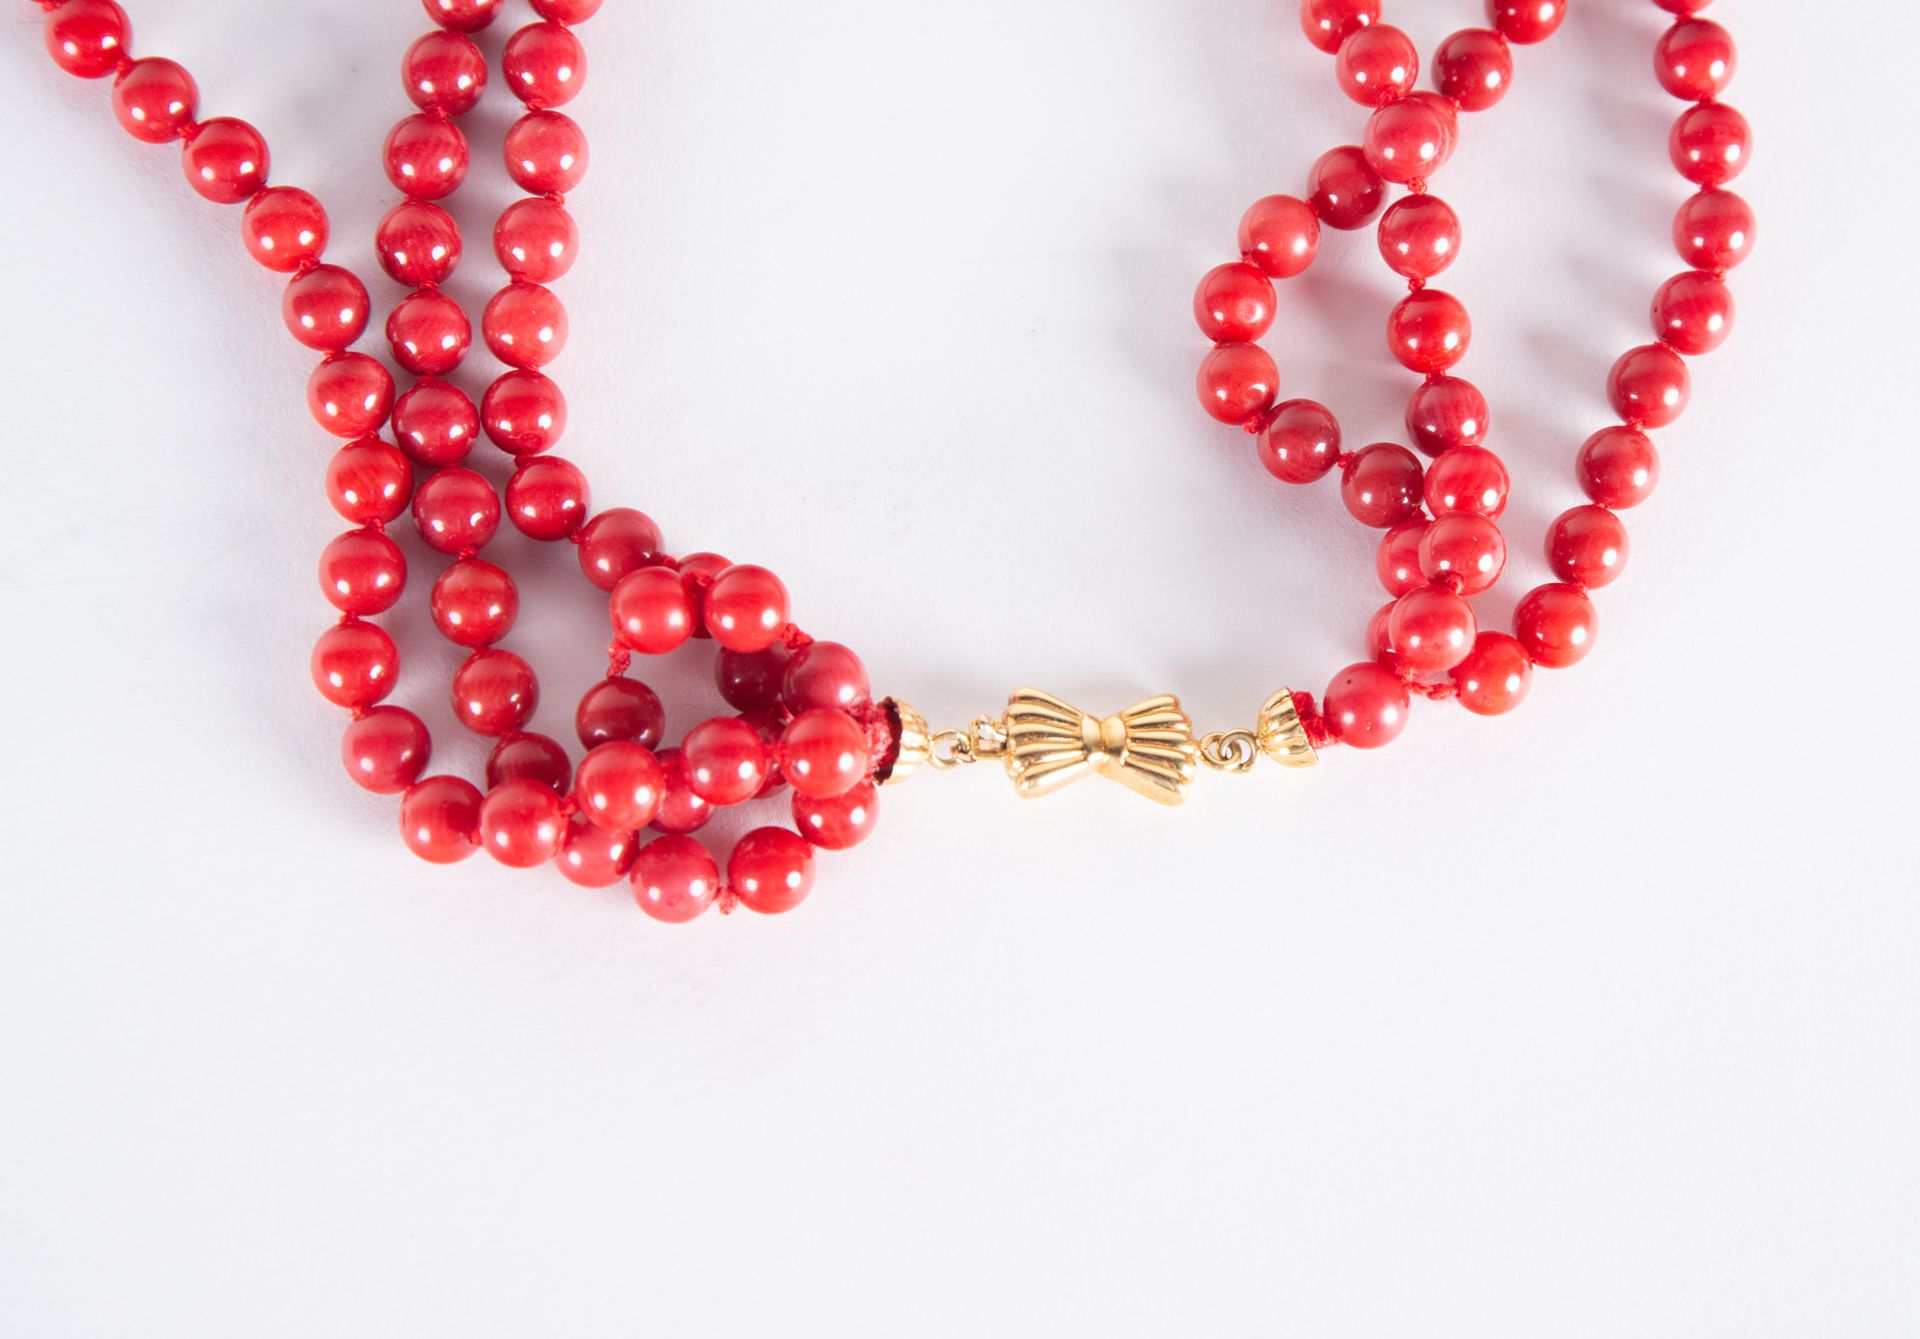 Large Bead Necklace with three rows in Red Coral, with 18 kt gold clasp - Image 2 of 2